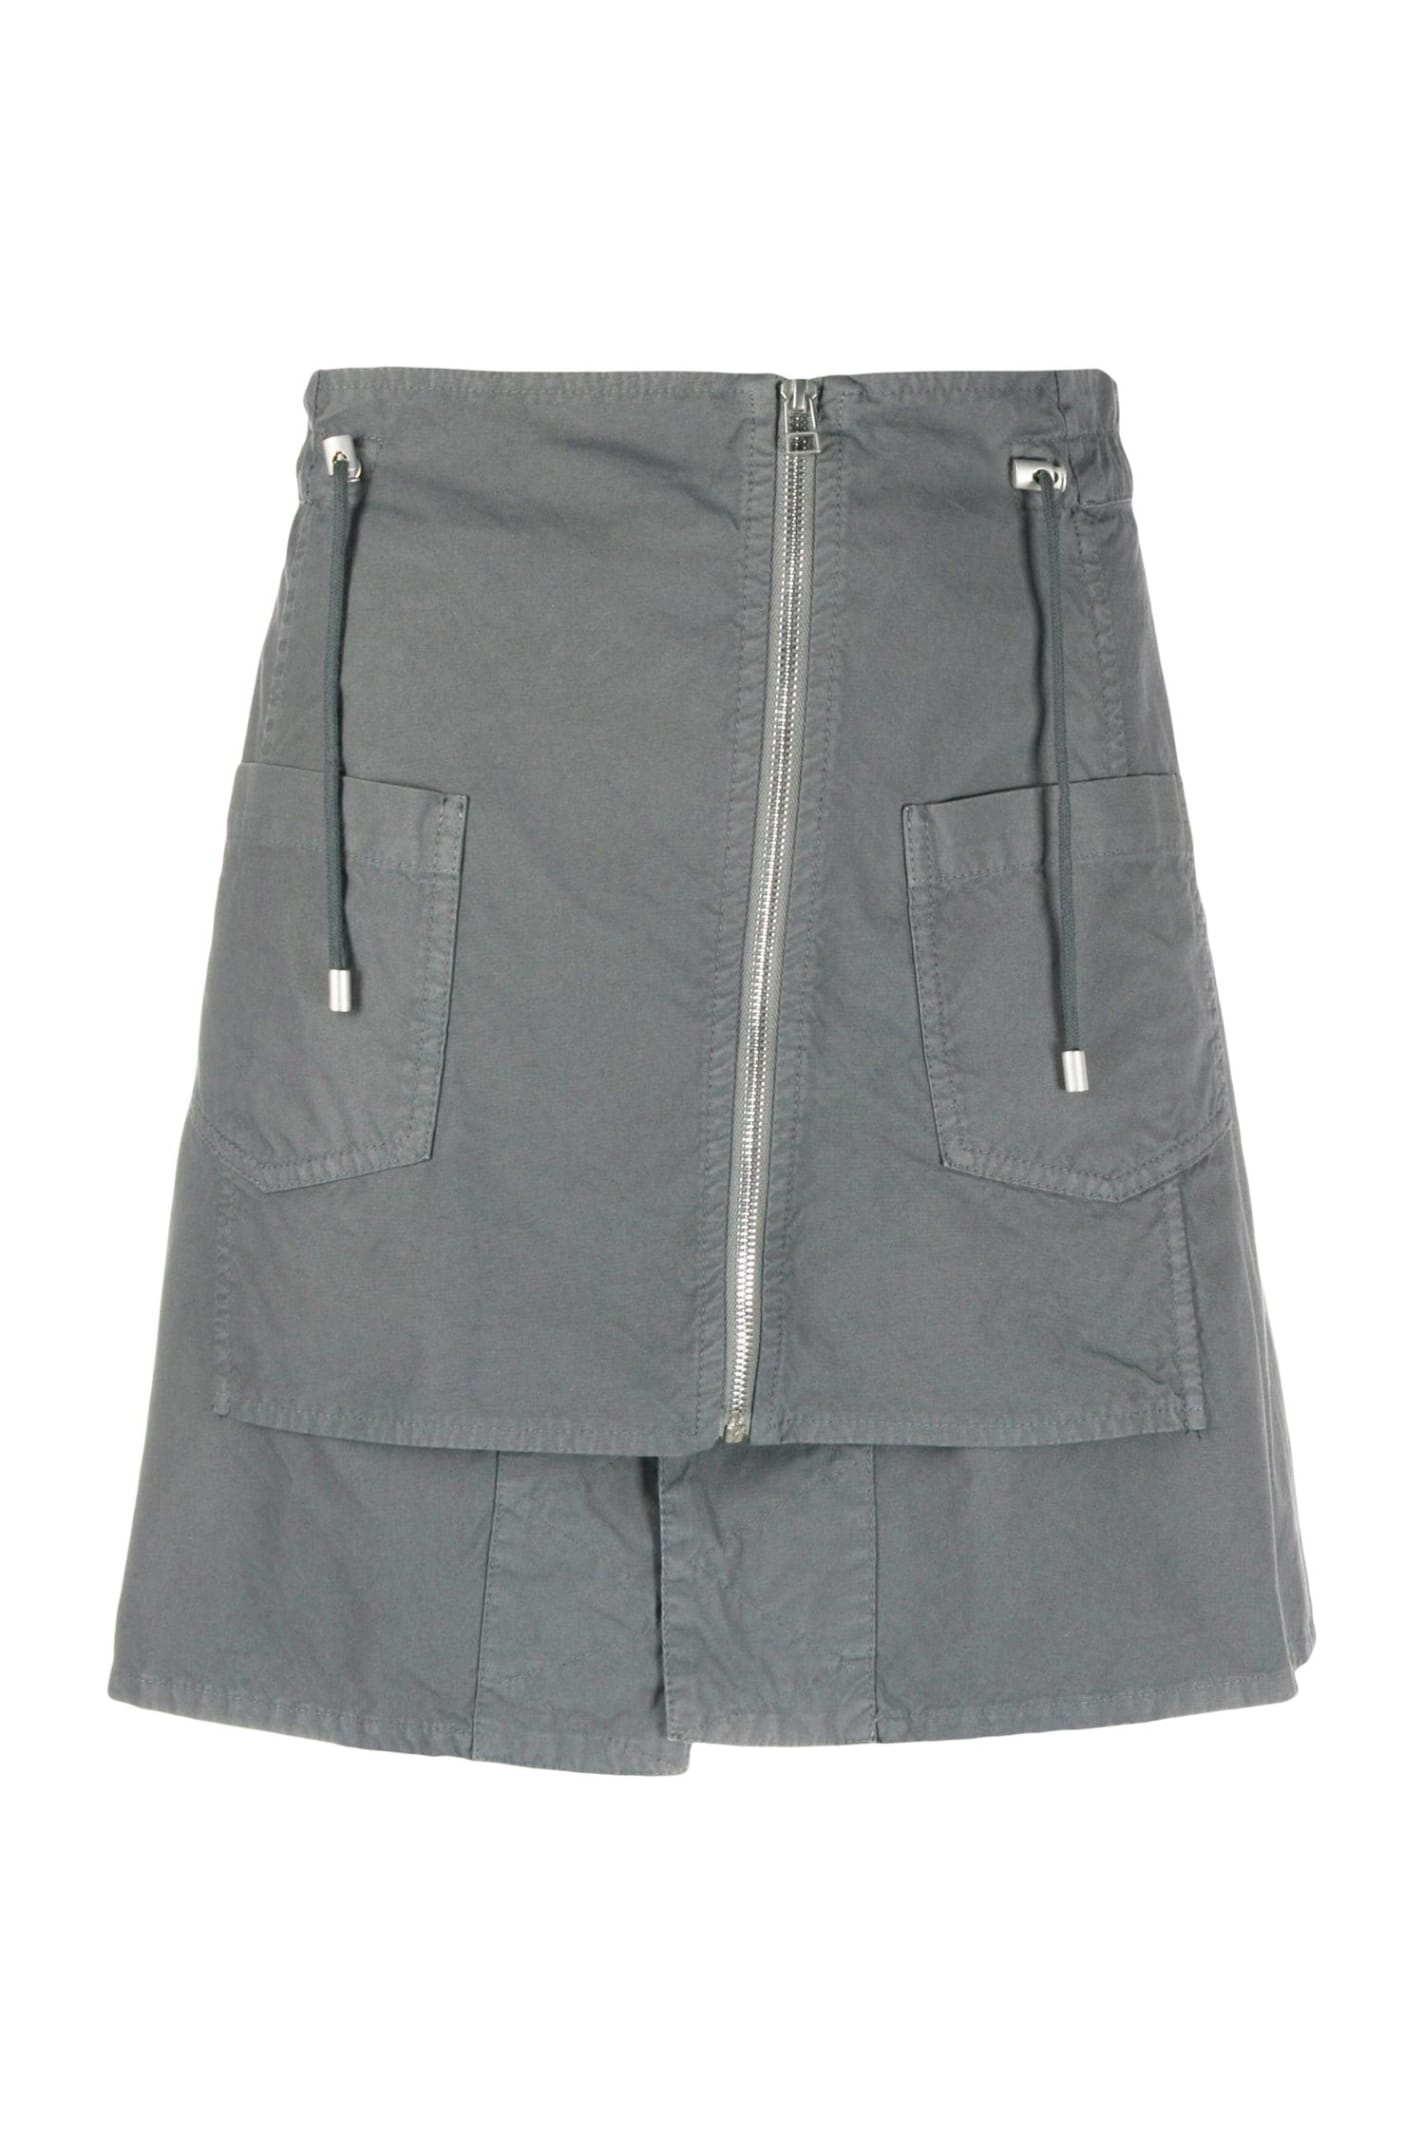 Mr & Mrs Italy Mini Skirt With Zippers